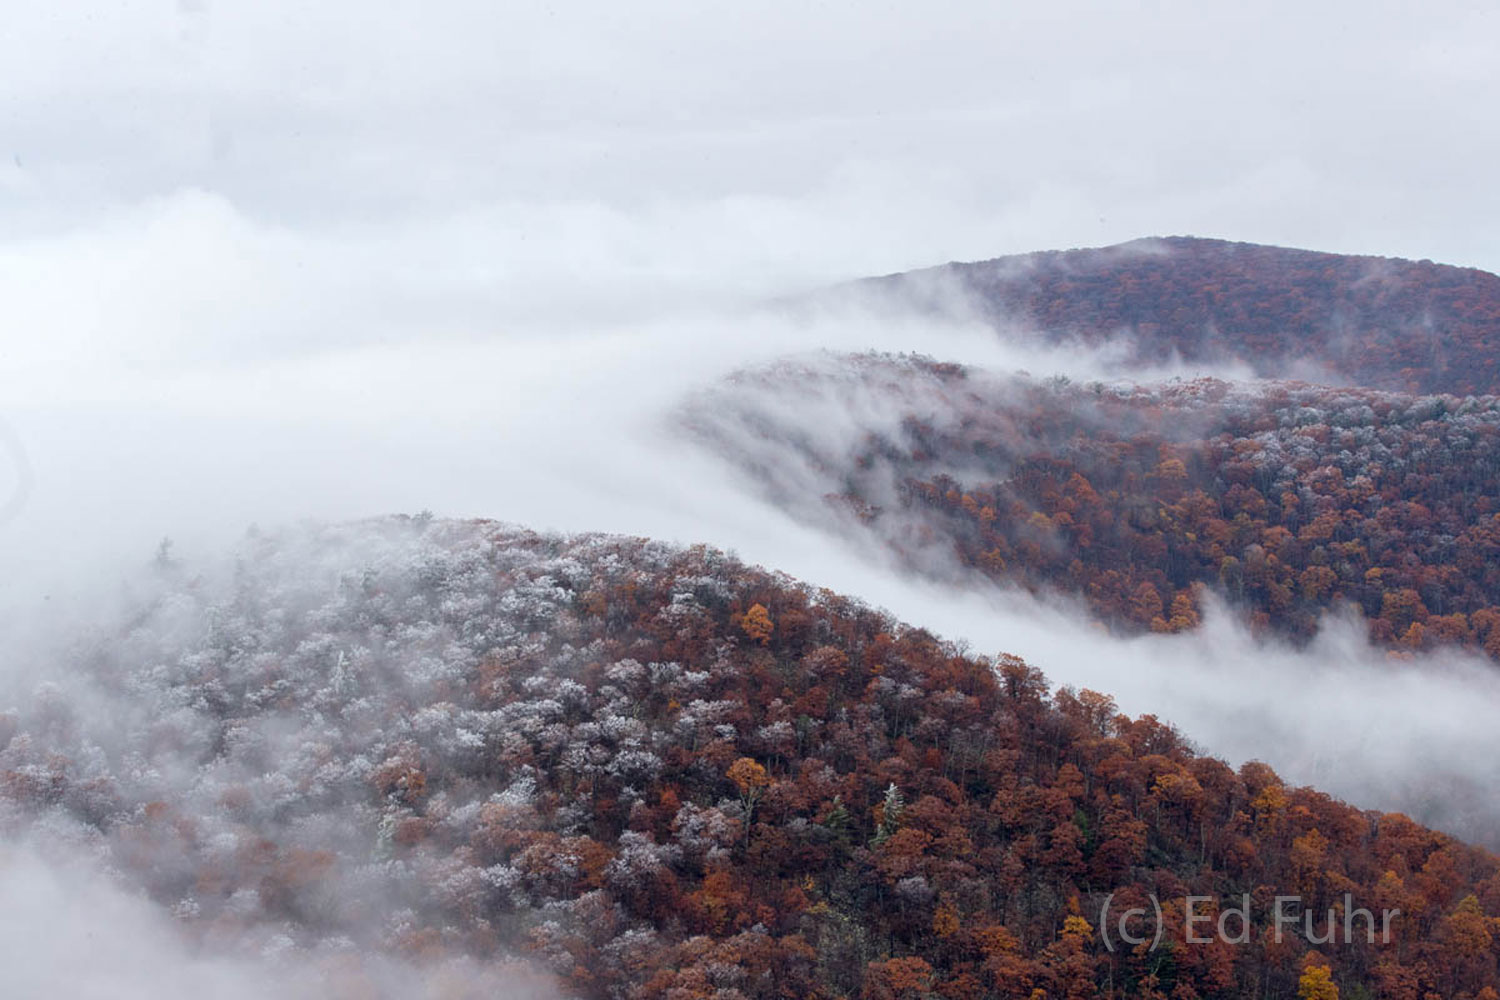 Layers of fog drift across the upper reaches of Stony Man Mountain in Shenandoah National Park.  Across the mountain, many of...